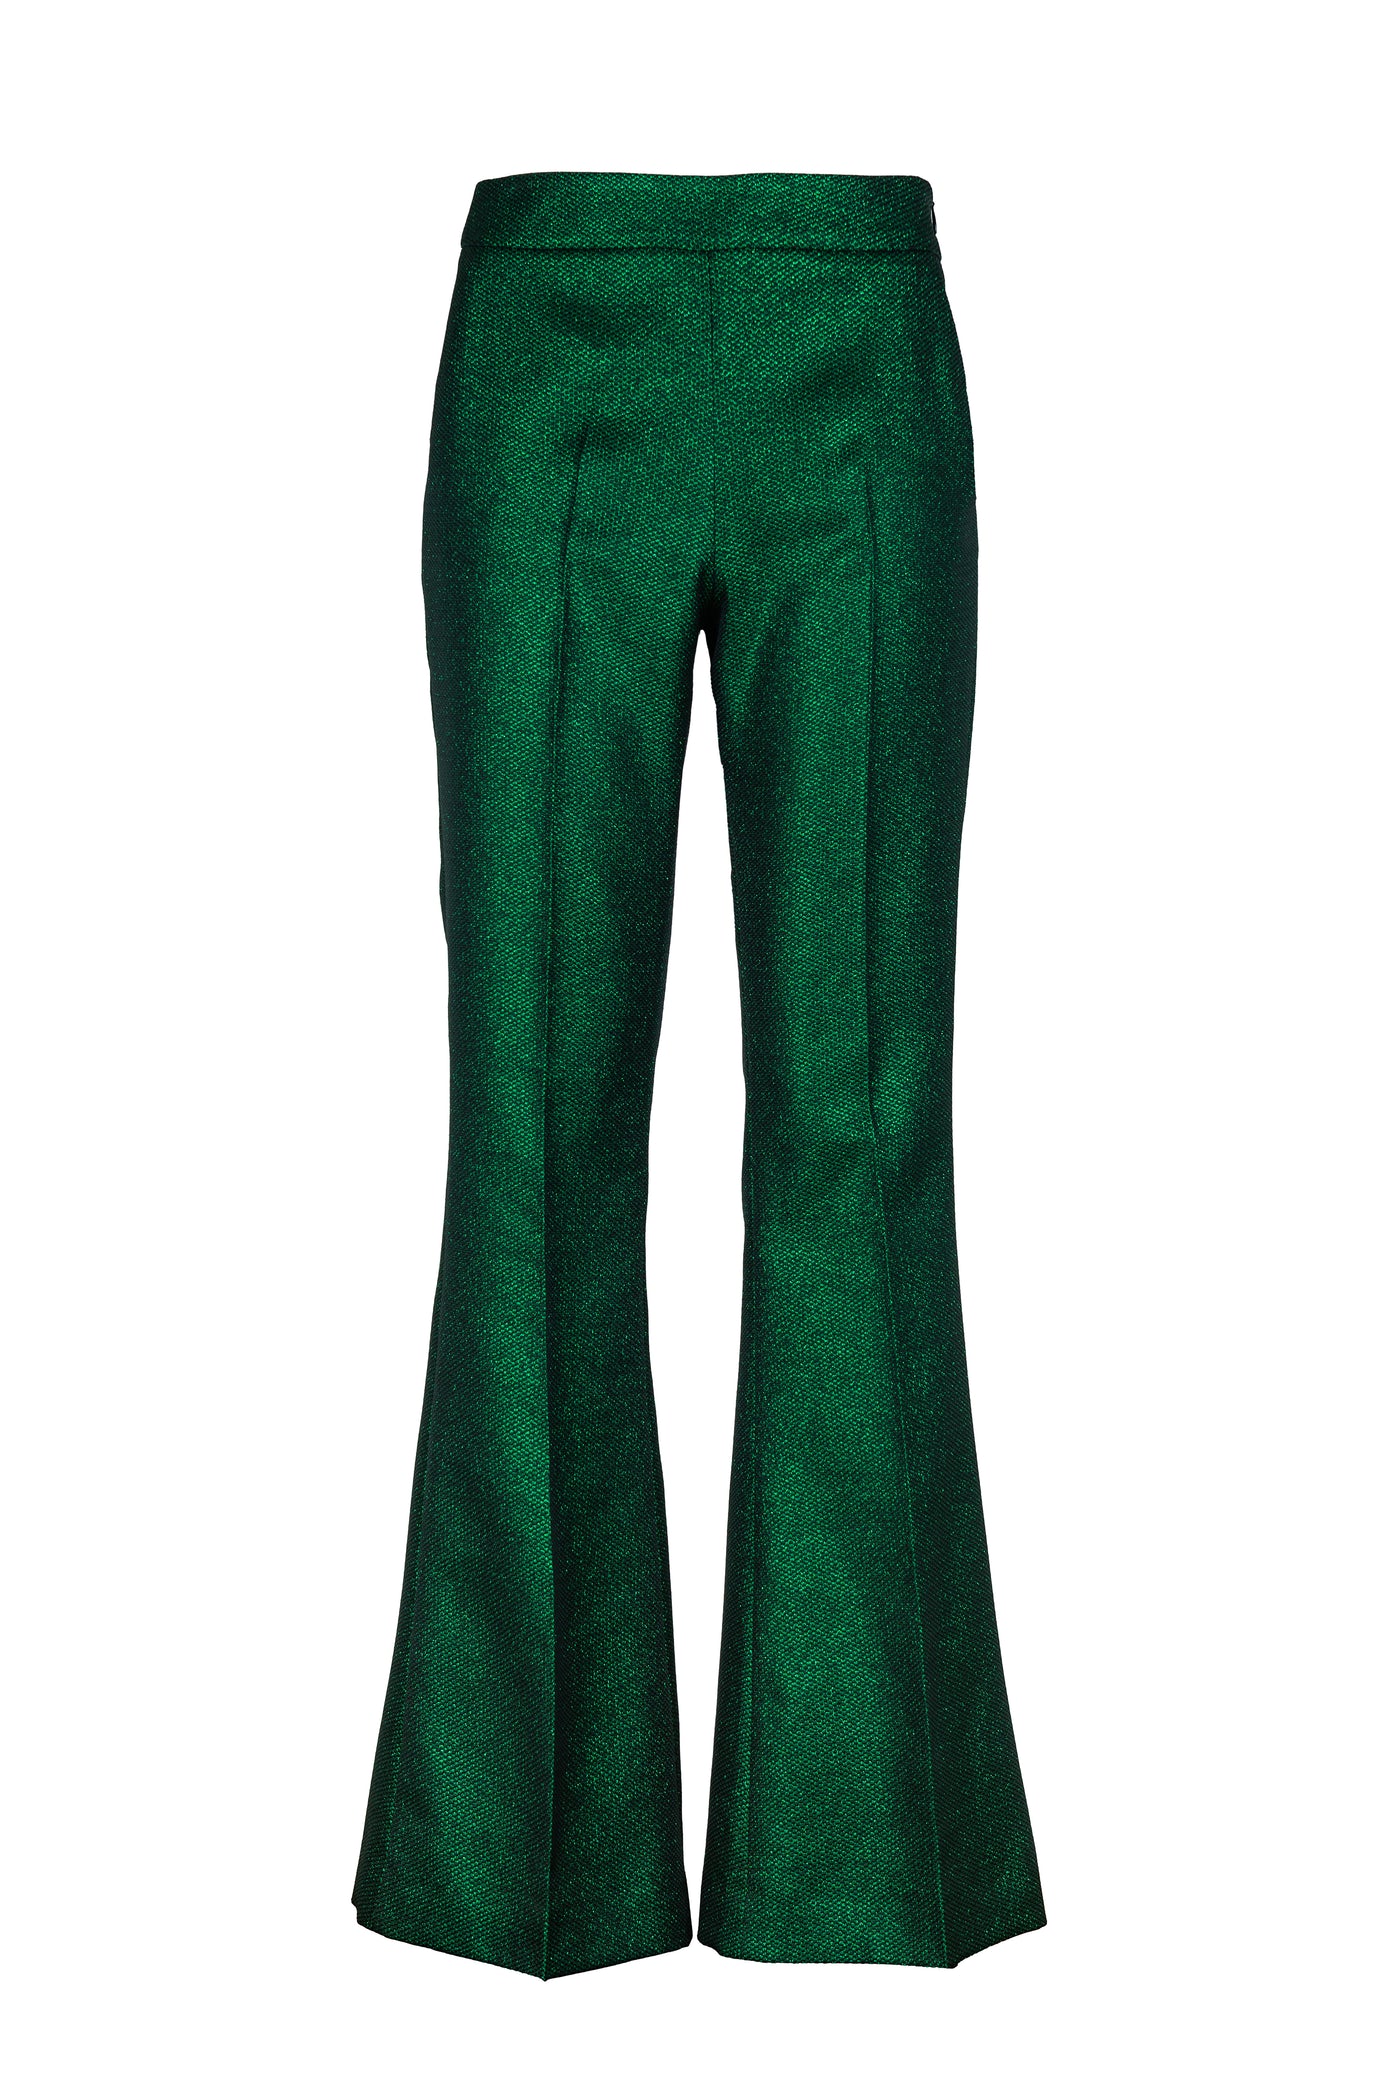 Bright Green Bell Pants